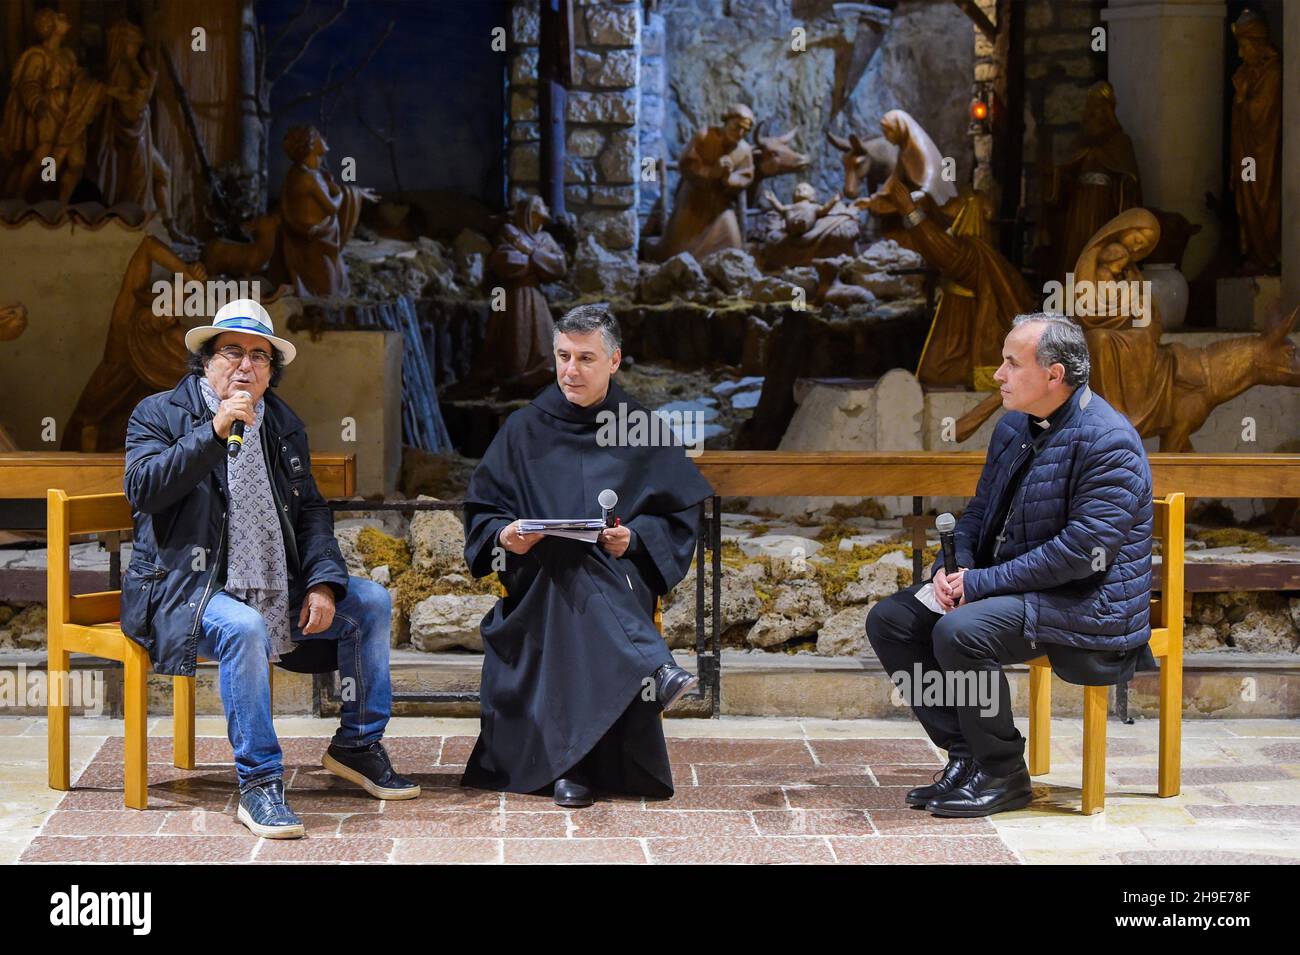 Rieti, Italy. 04th Dec, 2021. Italian singer-songwriters Al Bano Carrisi (L) talks about St. Francis at the Sanctuary of Greccio event for the 100th anniversary of the magazine San Francesco in Rieti, Italy, on December 4, 2021. The dialogue on the theme of 'rebirth' was attended by the Guardian of the Sanctuary of the First Crib, Father Carlo Serri, the mayor of the city, Emiliano Fabi and singer-songwriter Al Bano. (Photo by Riccardo Fabi/Pacific Press/Sipa USA) Credit: Sipa USA/Alamy Live News Stock Photo